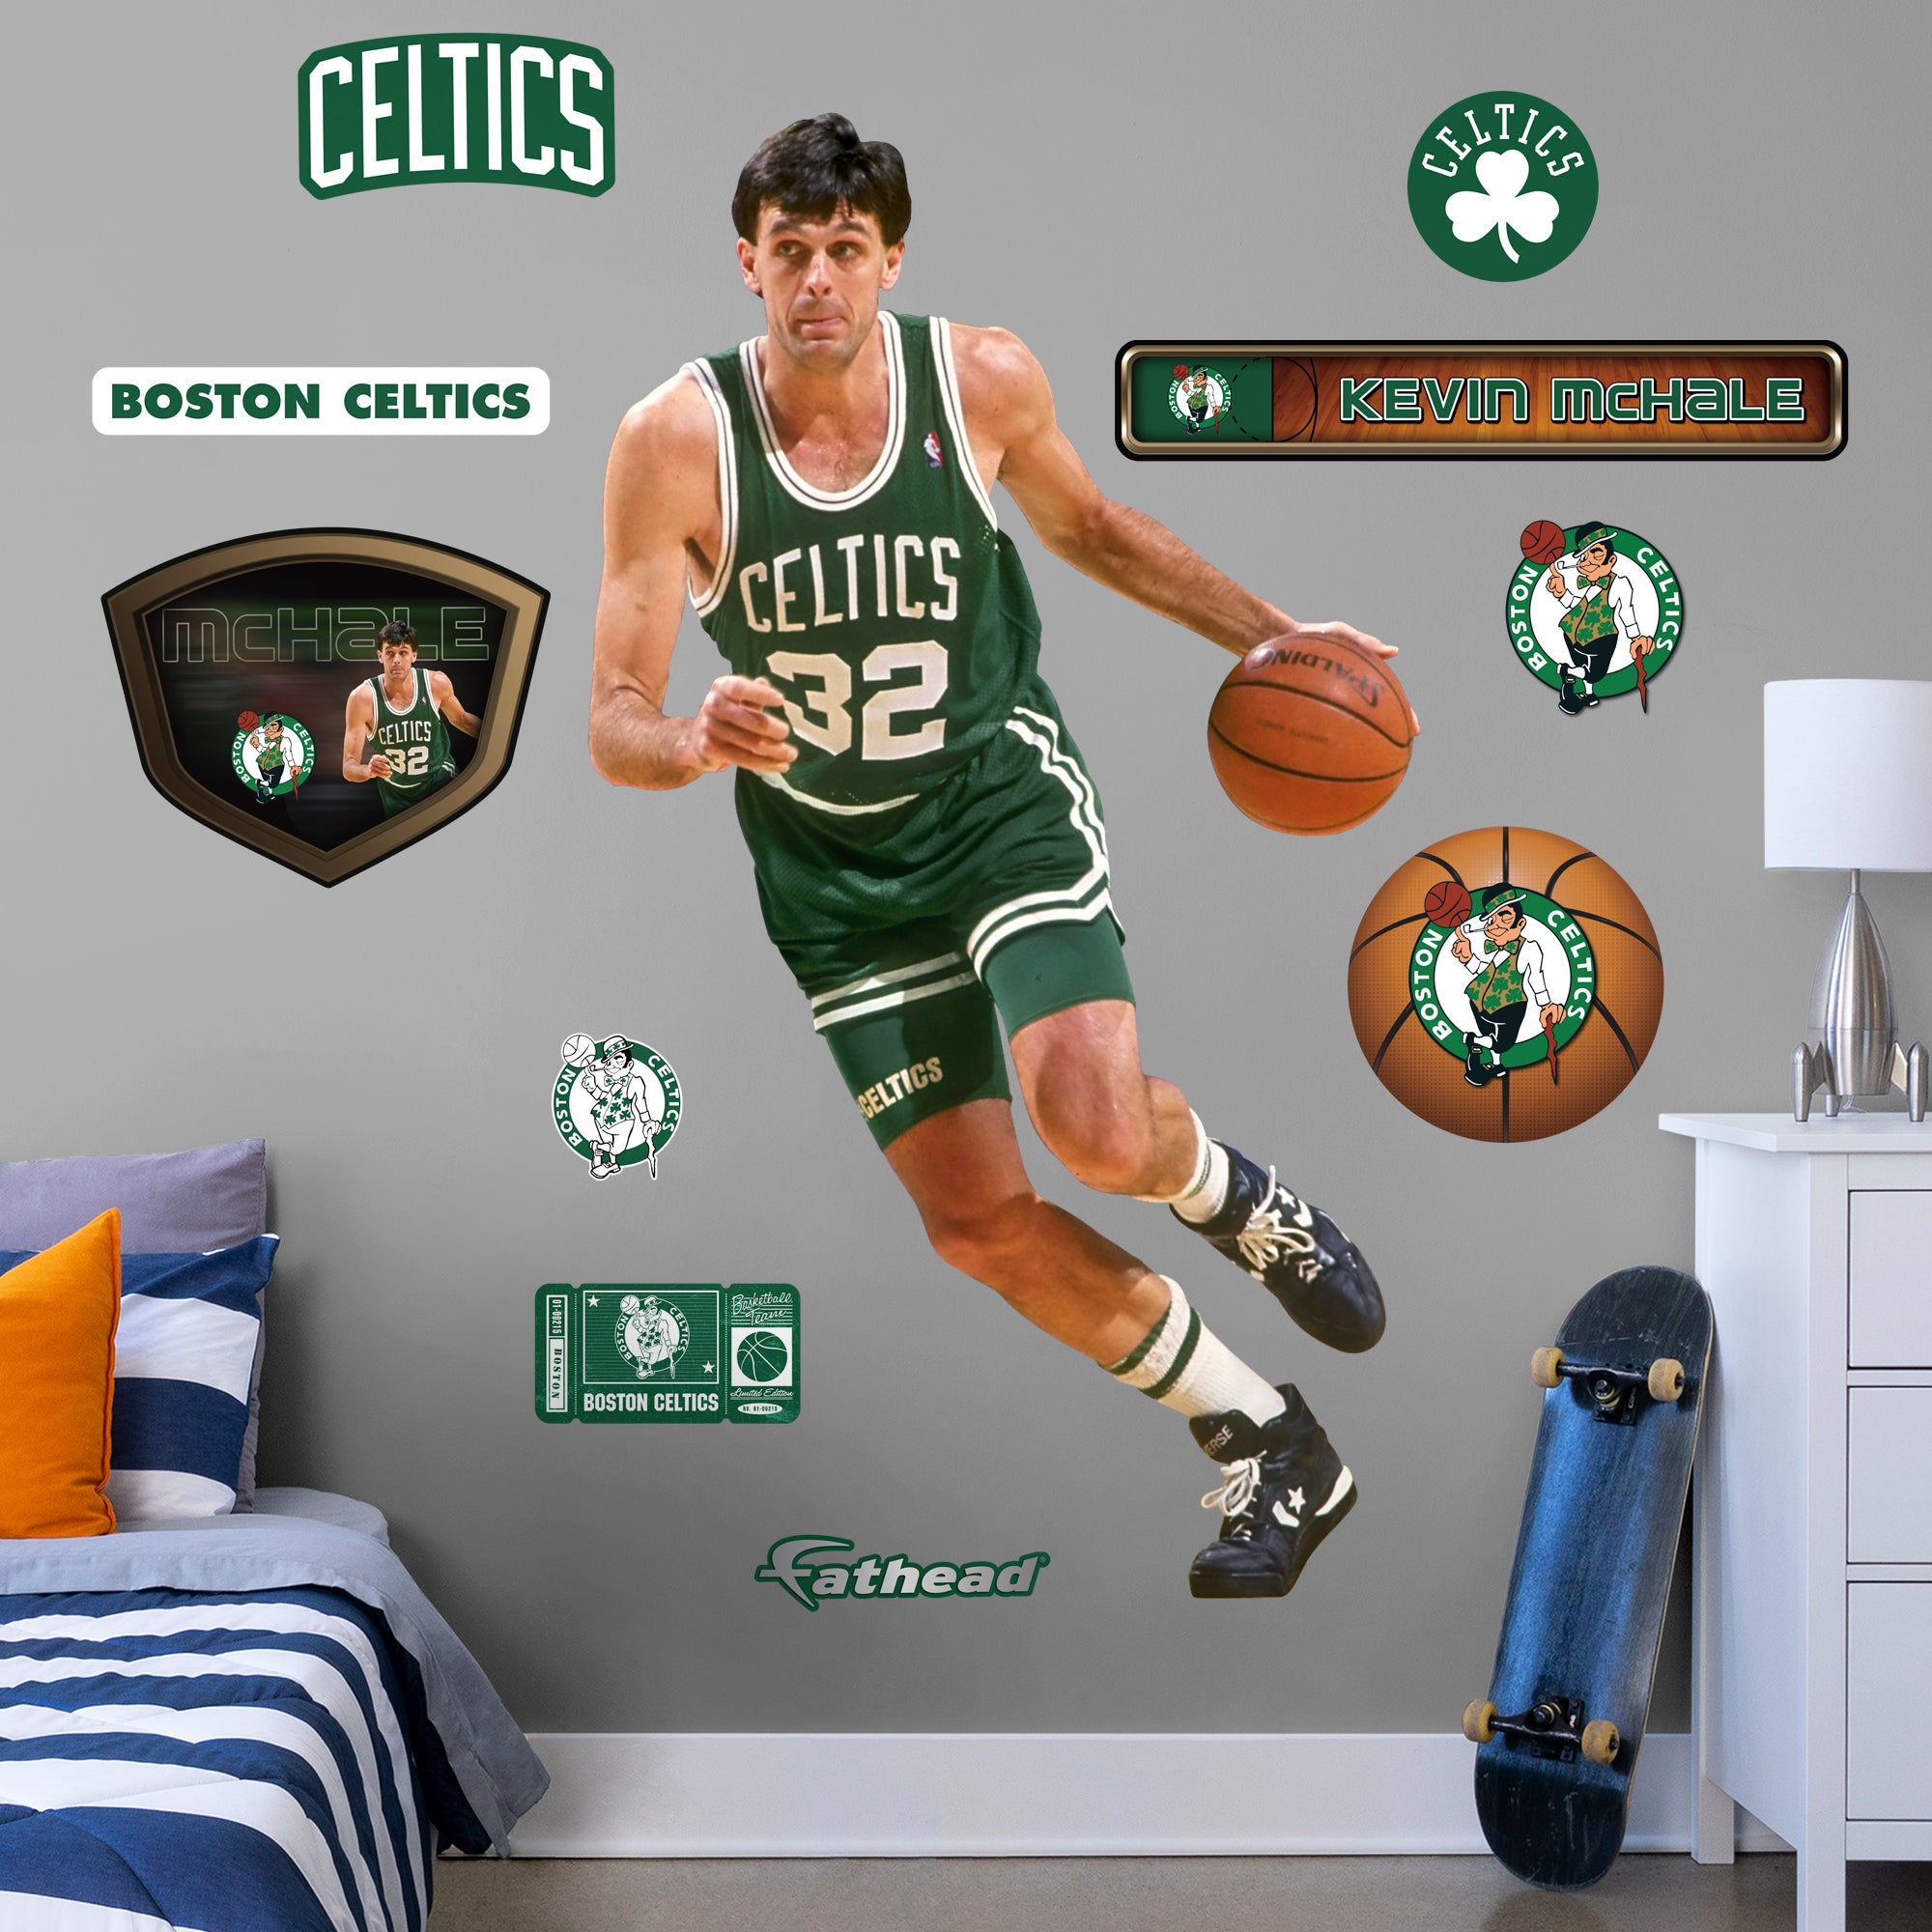 Kevin McHale Legend - Officially Licensed NBA Removable Wall Decal Life-Size Athlete + 10 Decals (43"W x 77"H) by Fathead | Viny